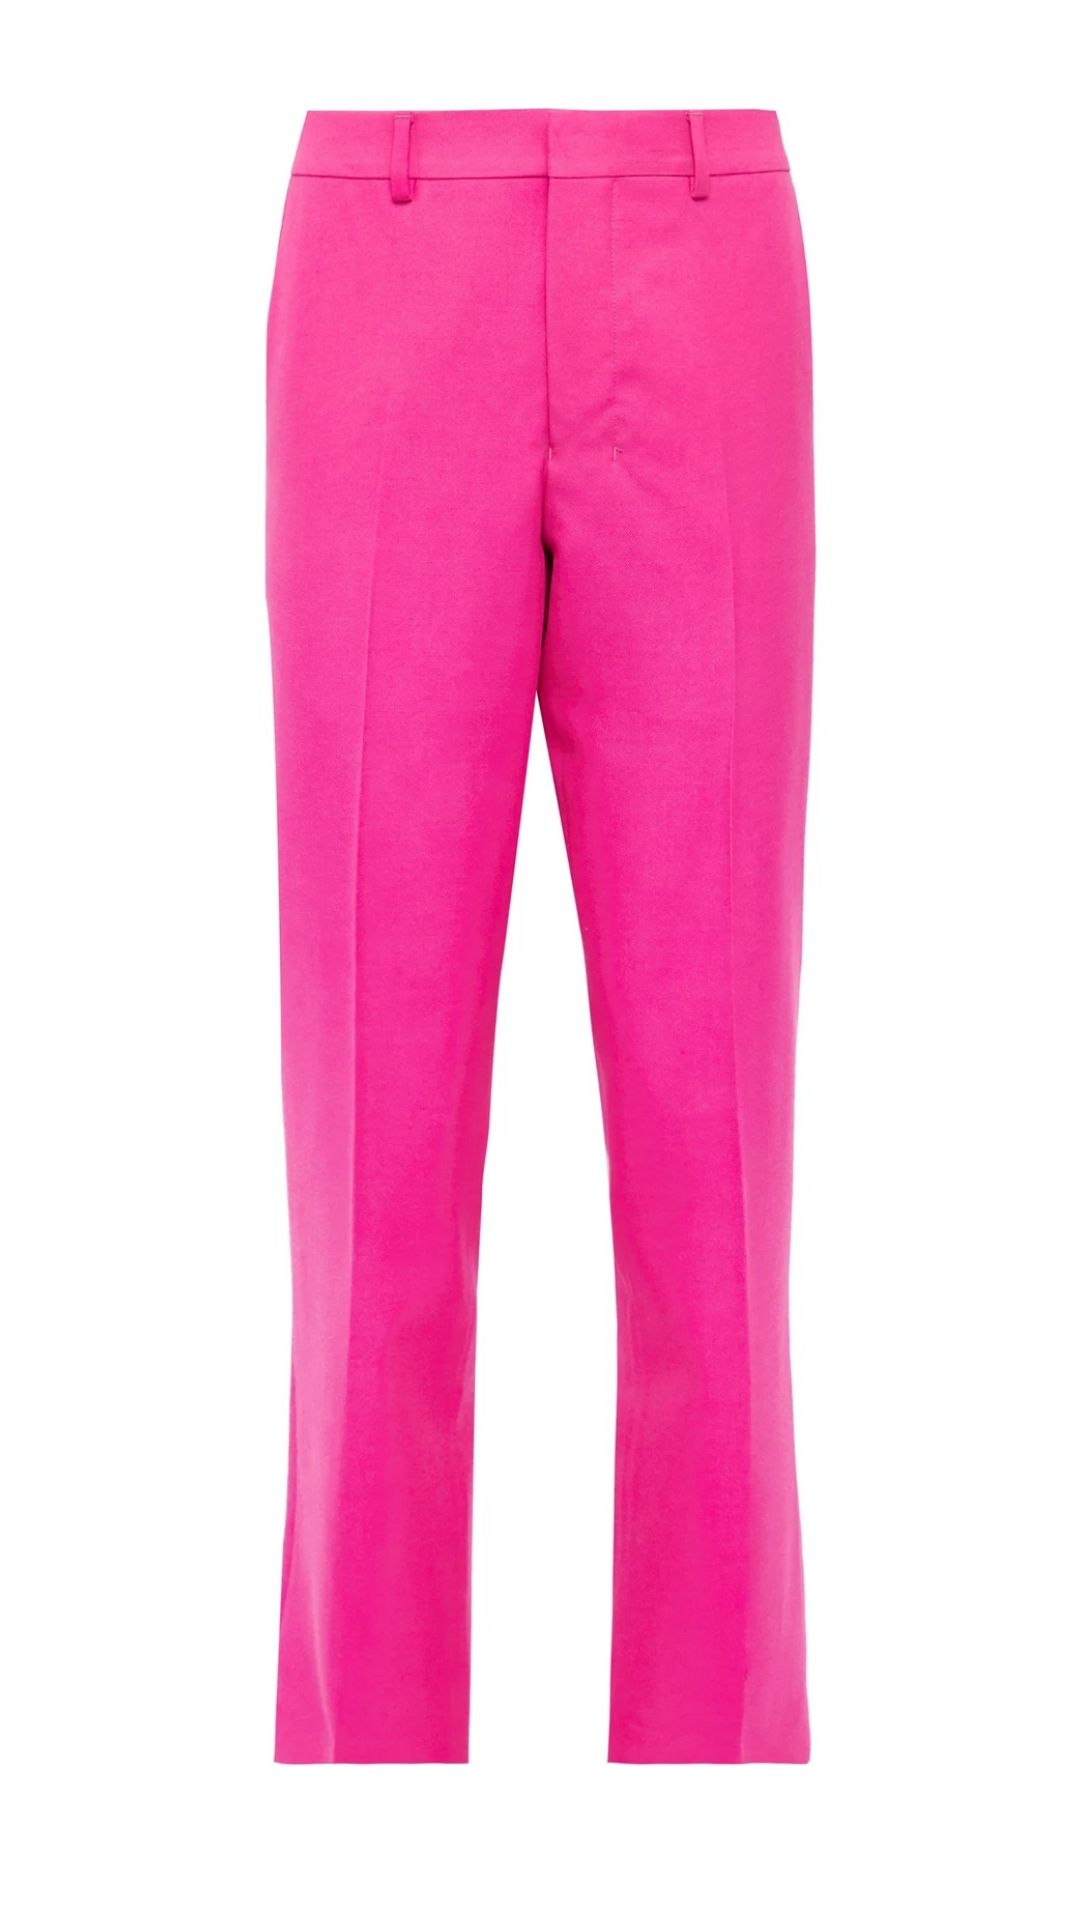 Throwing shade: Punchy pink is your Summer hue-cue, here’s how to wear ...